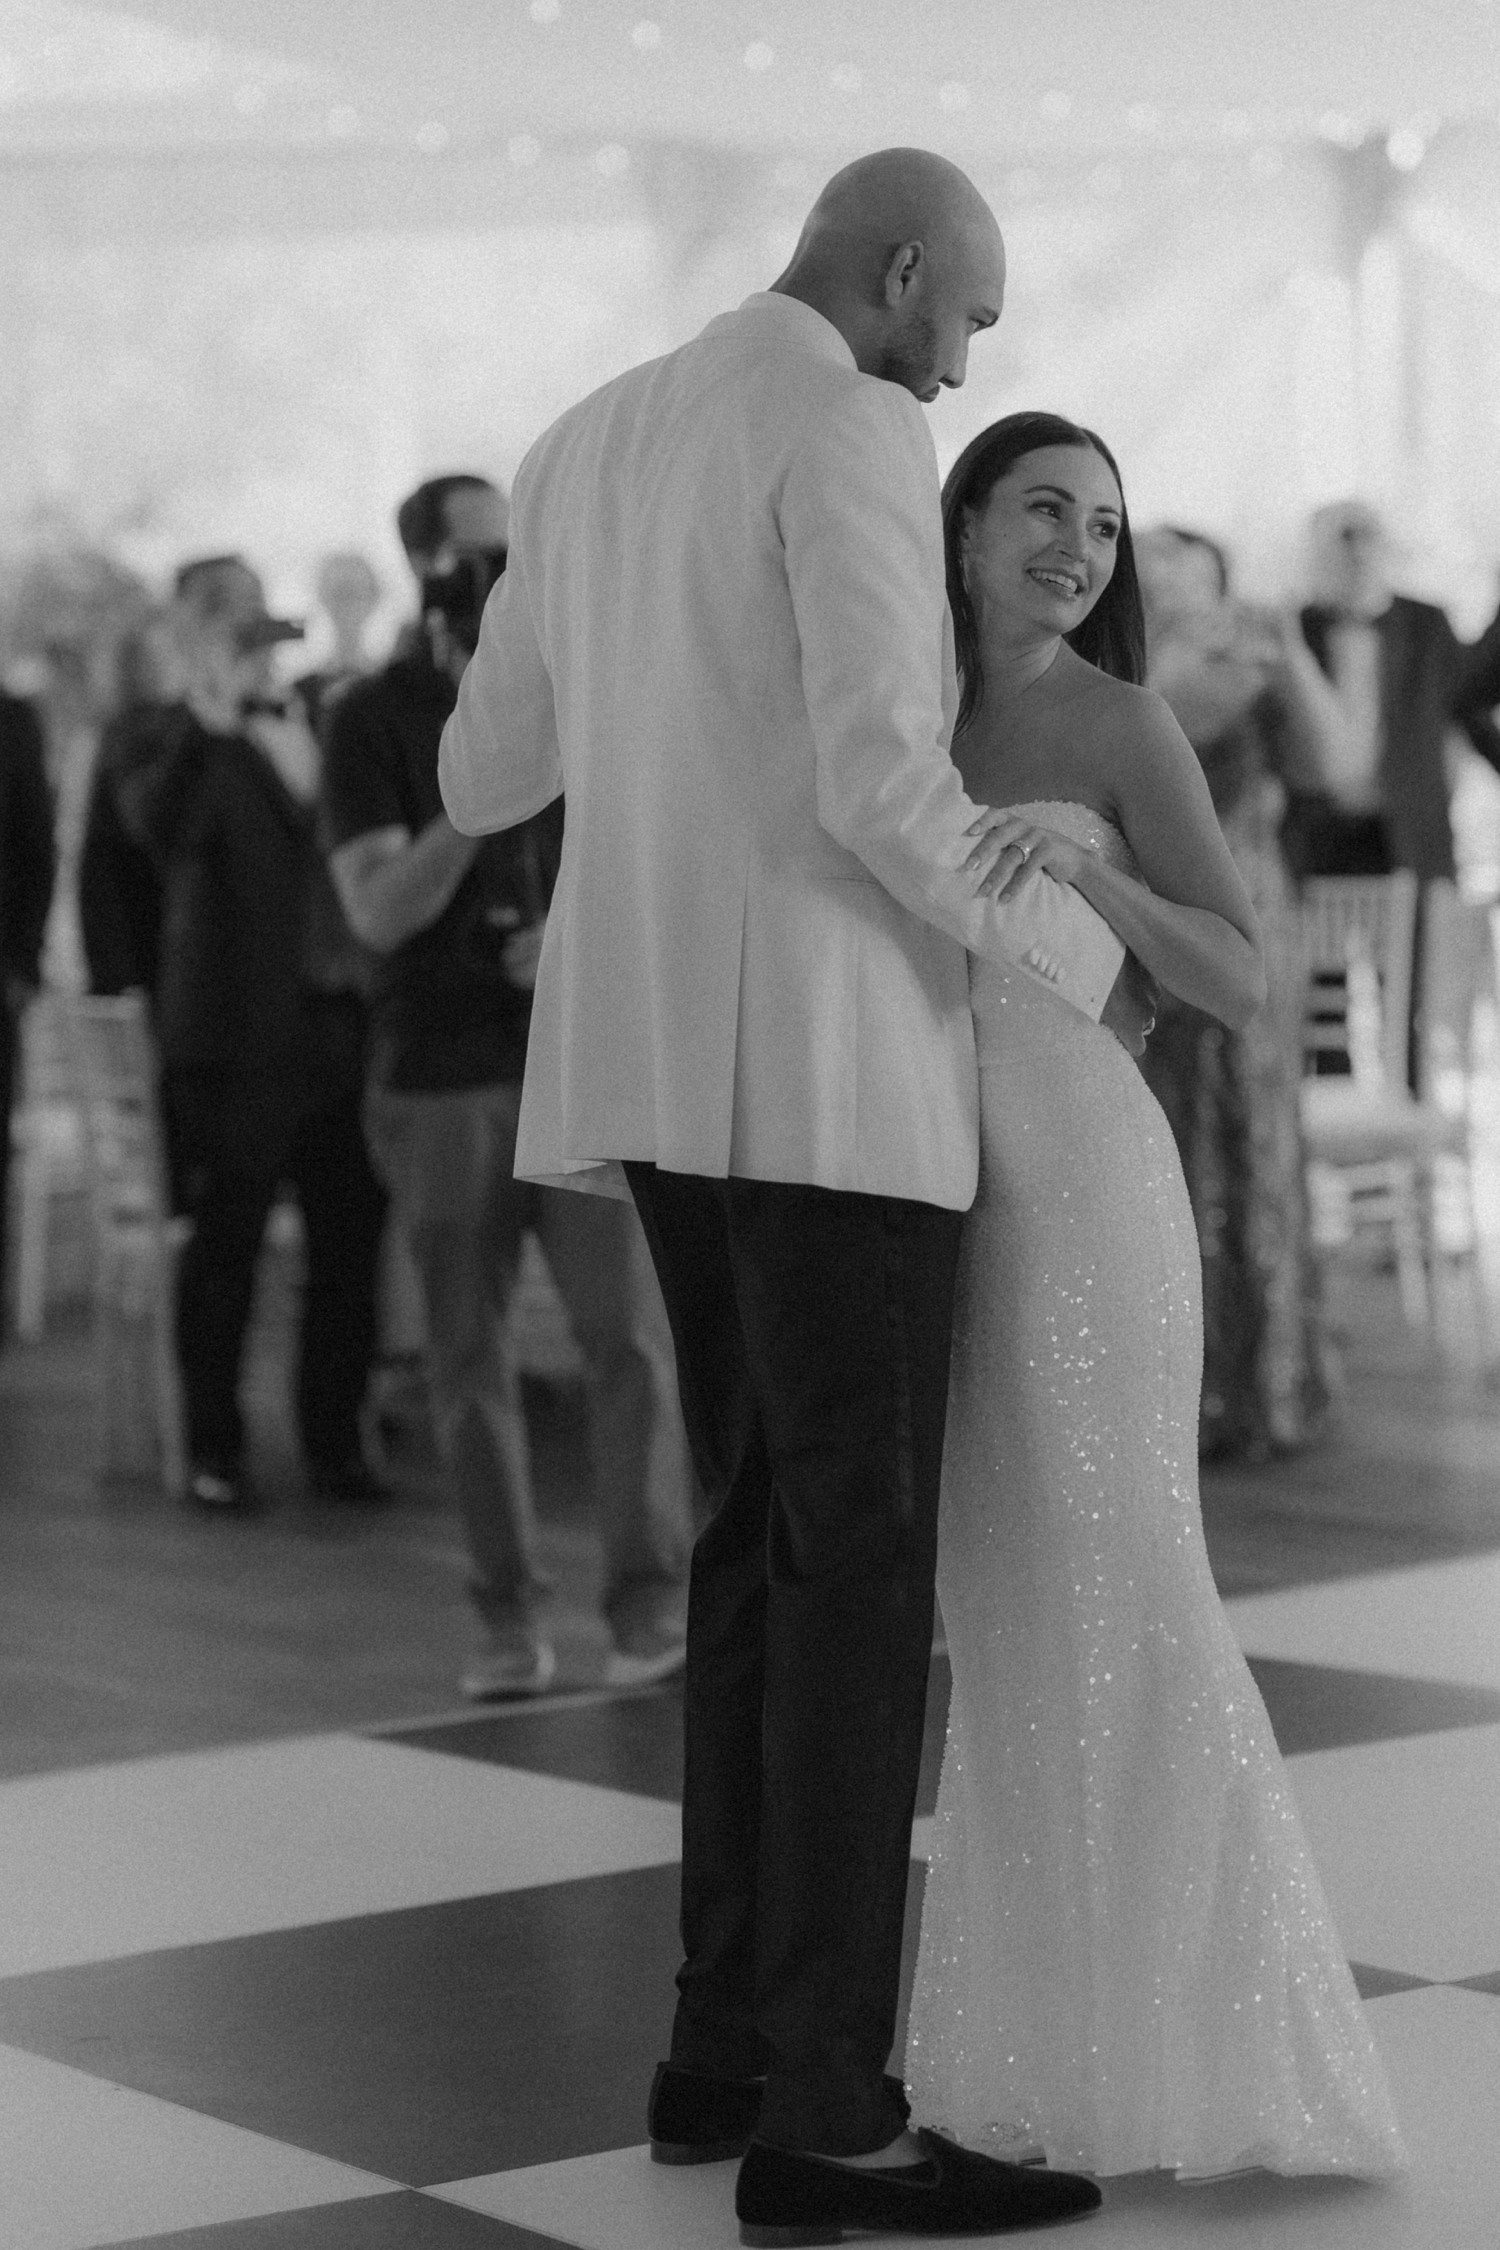 Bride and groom wedding first dance on black and white dance floor. 